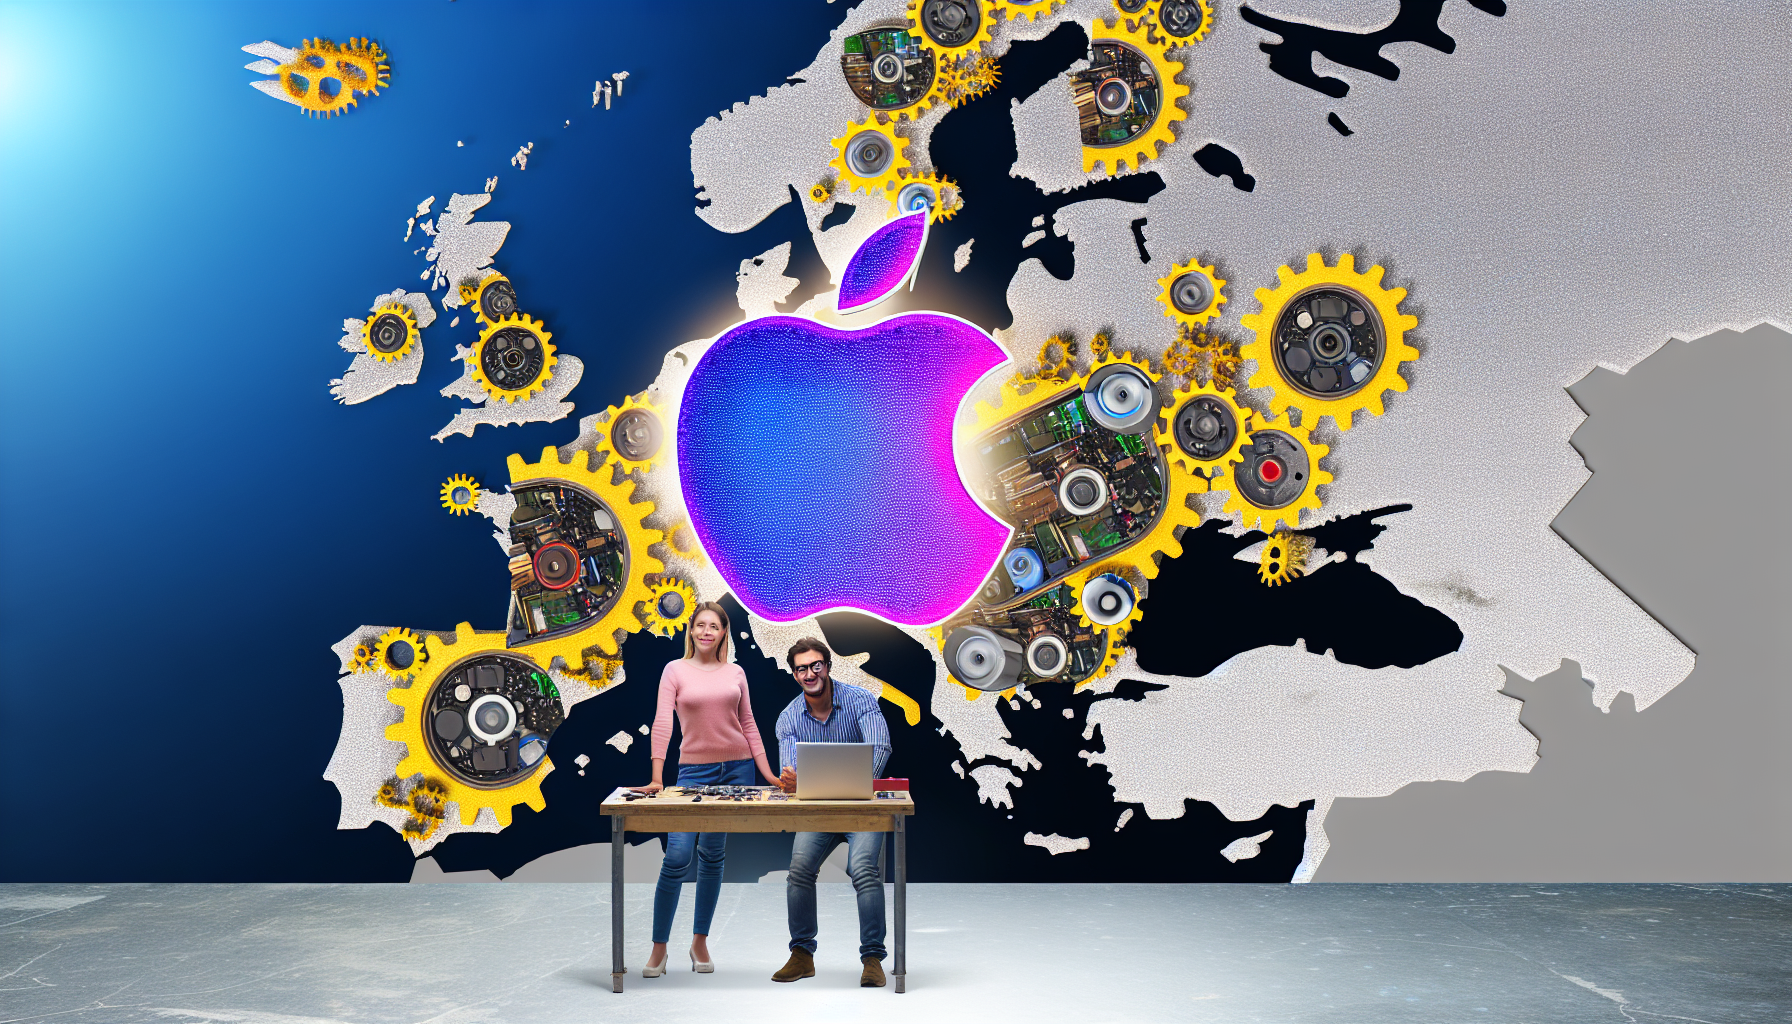 Apple's self-service repair program expands to Europe: a game-changer for technology users